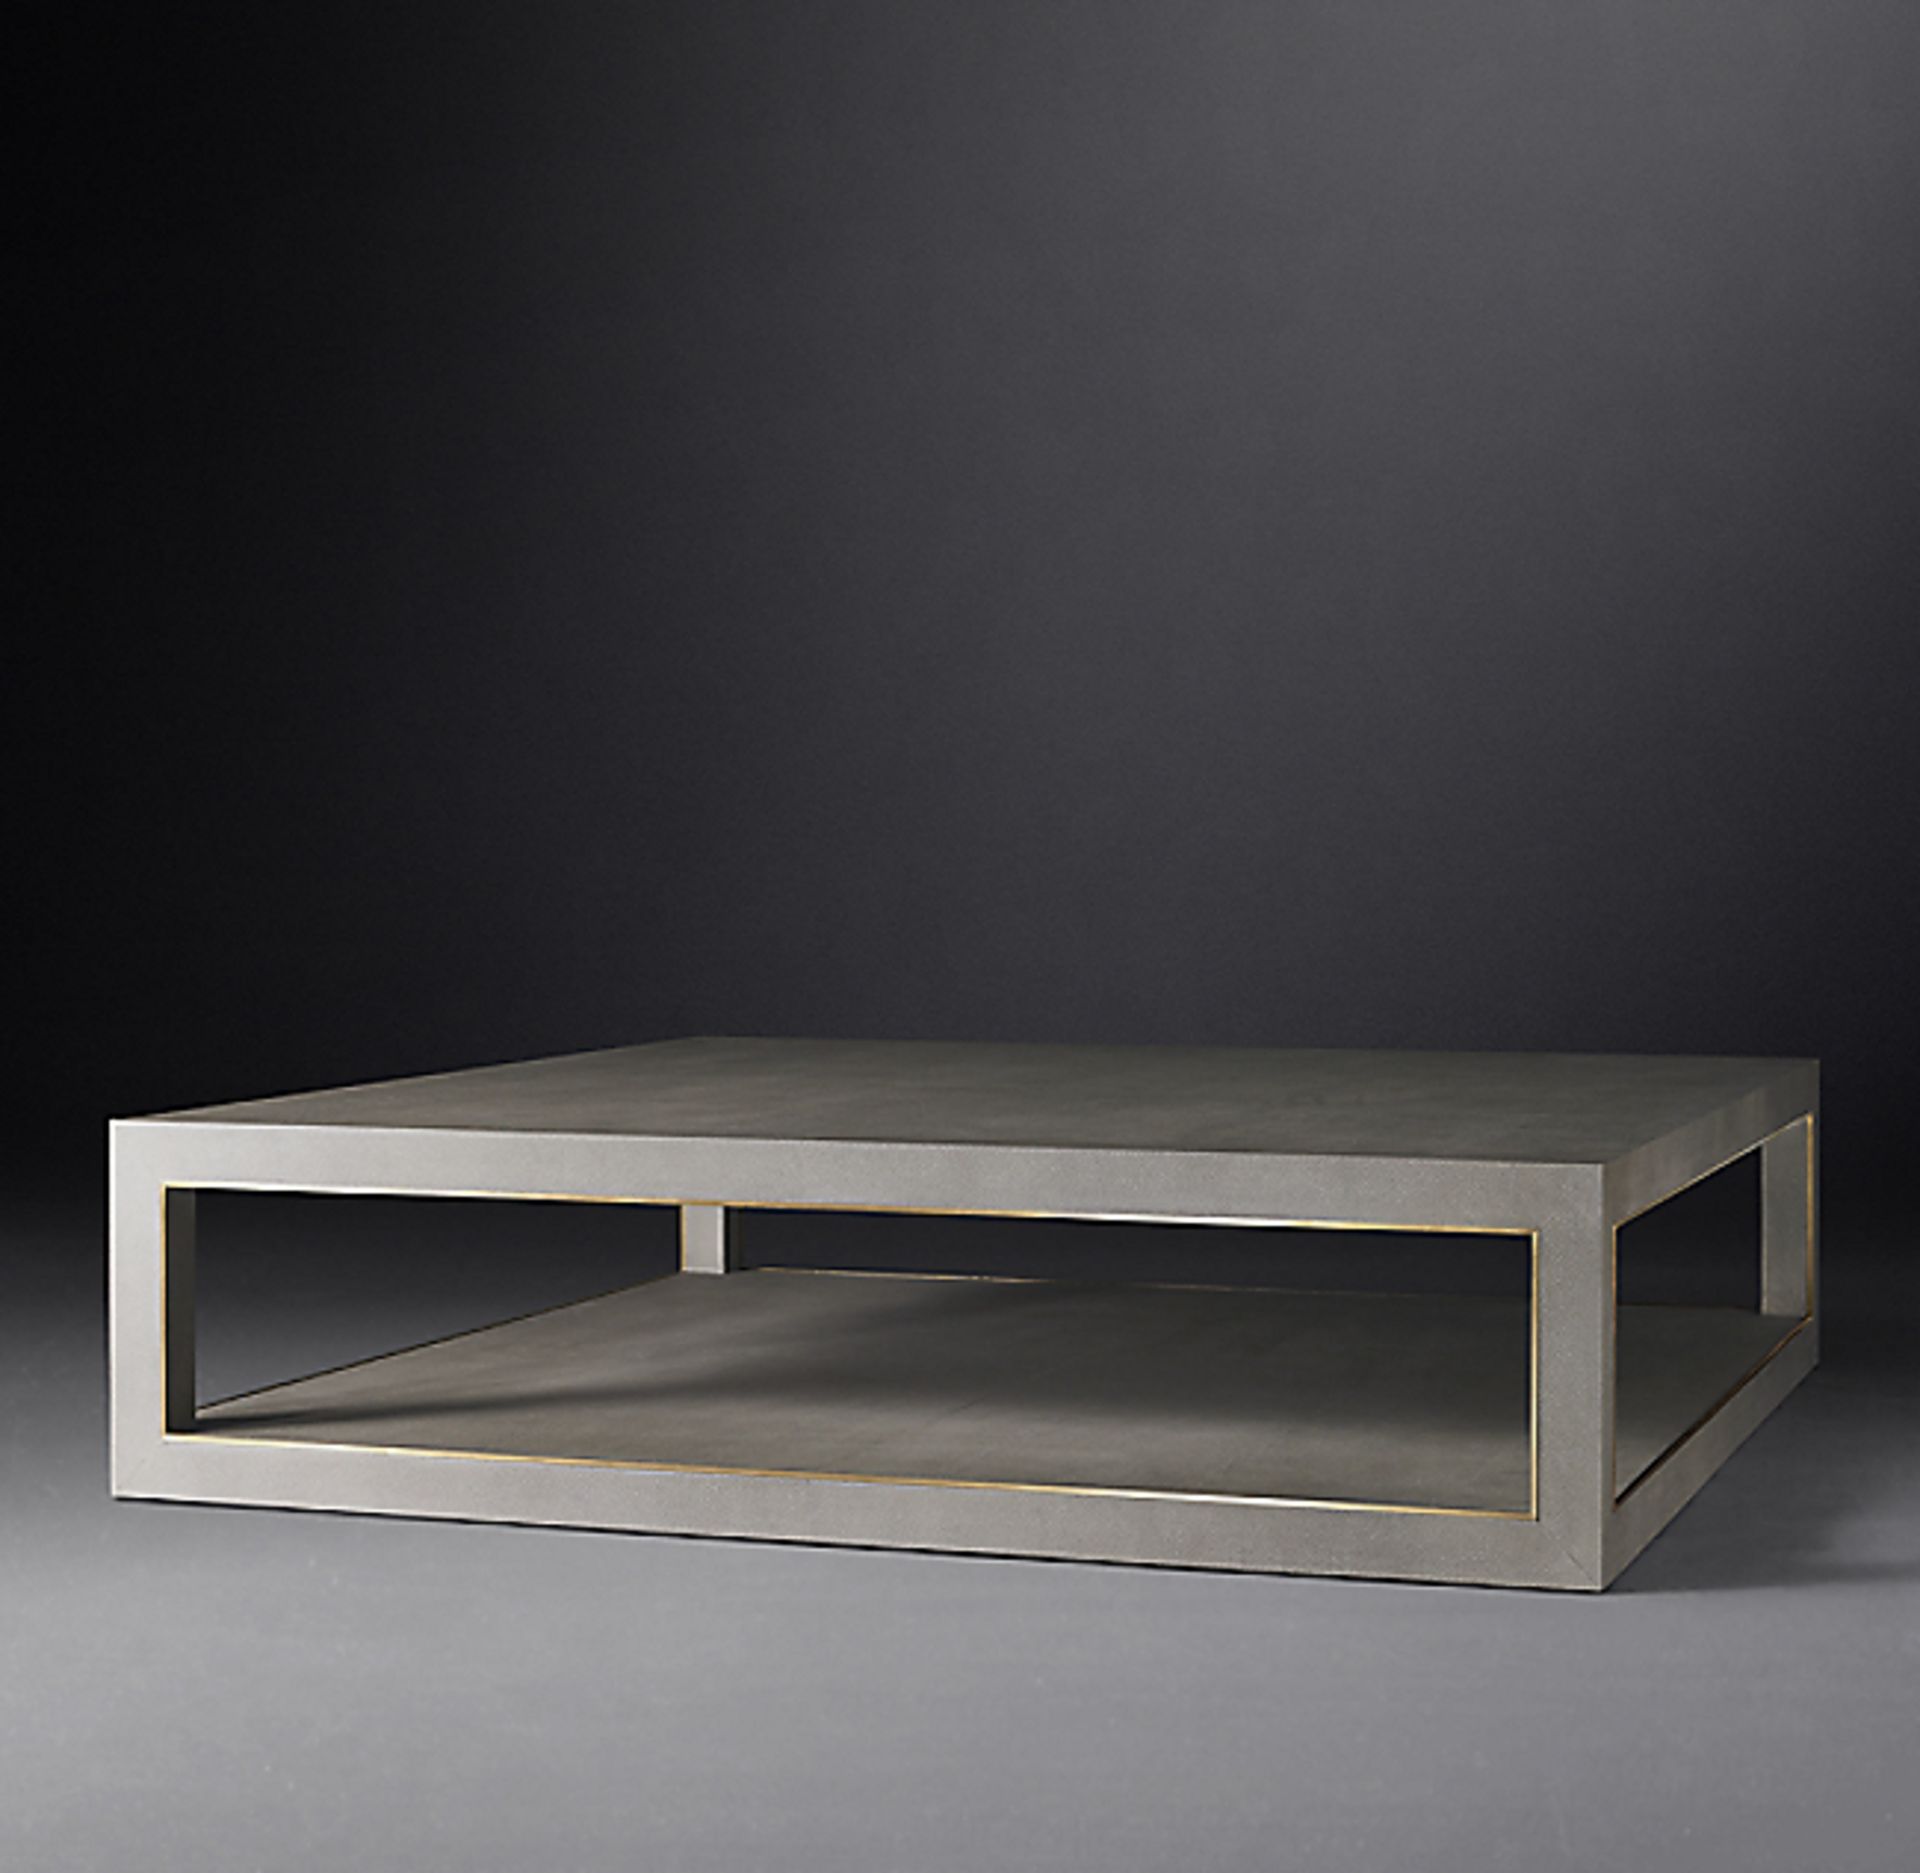 Cela Grey Shagreen Square Coffee Table Crafted of shagreen-embossed leather with the texture,